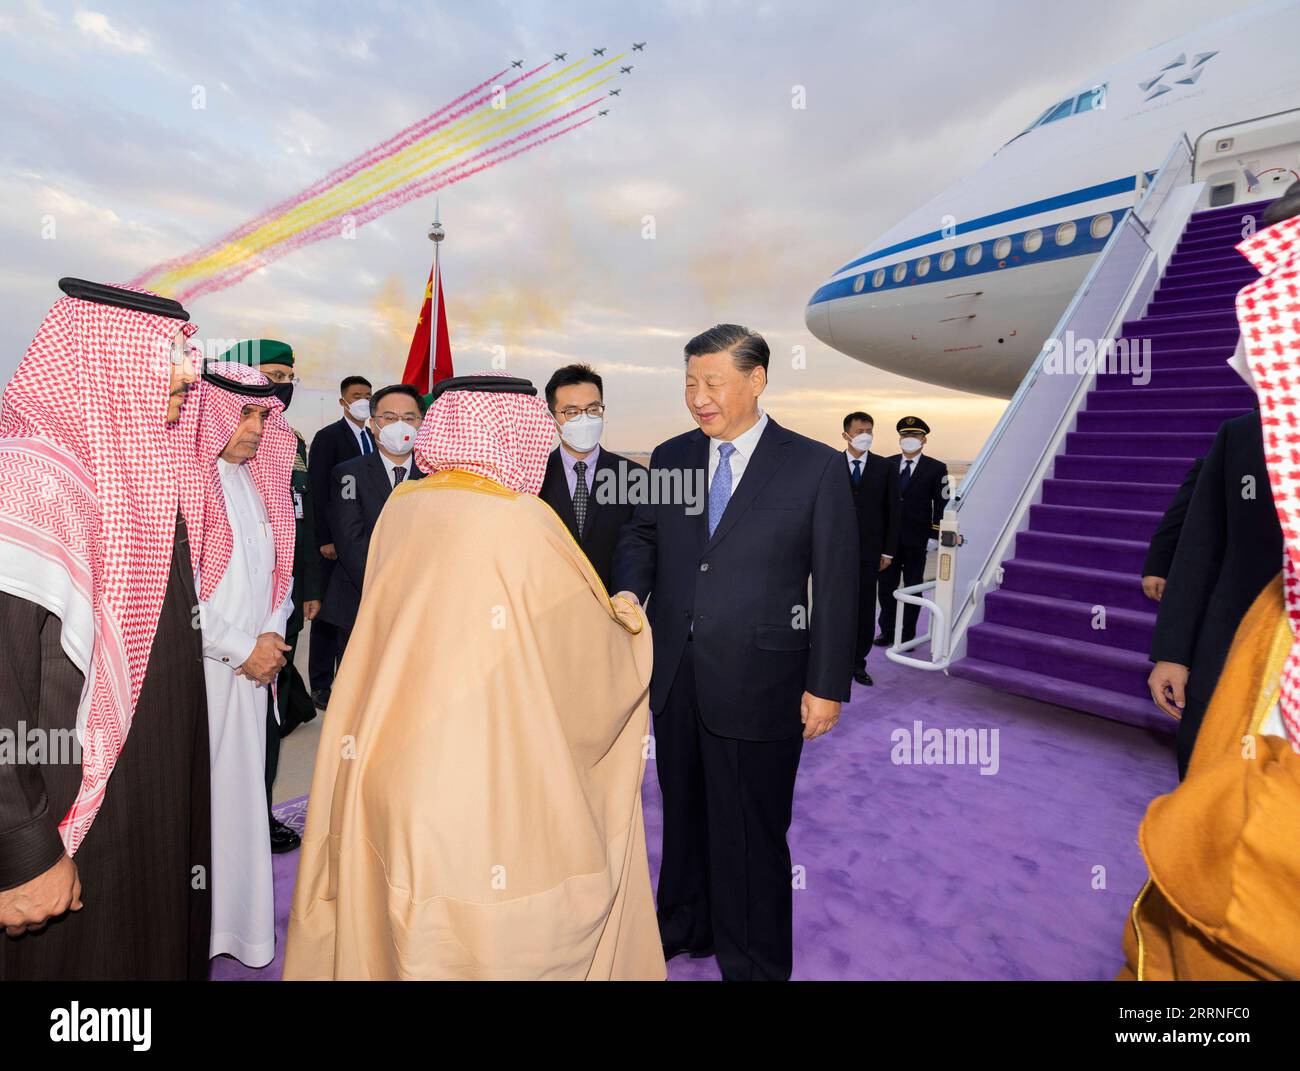 230109 -- BEIJING, Jan. 9, 2023 -- Chinese President Xi Jinping is warmly greeted upon his arrival by Governor of Riyadh Province Prince Faisal bin Bandar Al Saud, Foreign Minister Prince Faisal bin Farhan Al Saud, Minister Yasir Al-Rumayyan who works on China affairs and other key members of the royal family and senior officials of the government at the King Khalid International Airport in Riyadh, Saudi Arabia, Dec. 7, 2022. Xi arrived here on Dec. 7, 2022 to attend the first China-Arab States Summit and the China-Gulf Cooperation Council GCC Summit, and pay a state visit to Saudi Arabia at t Stock Photo